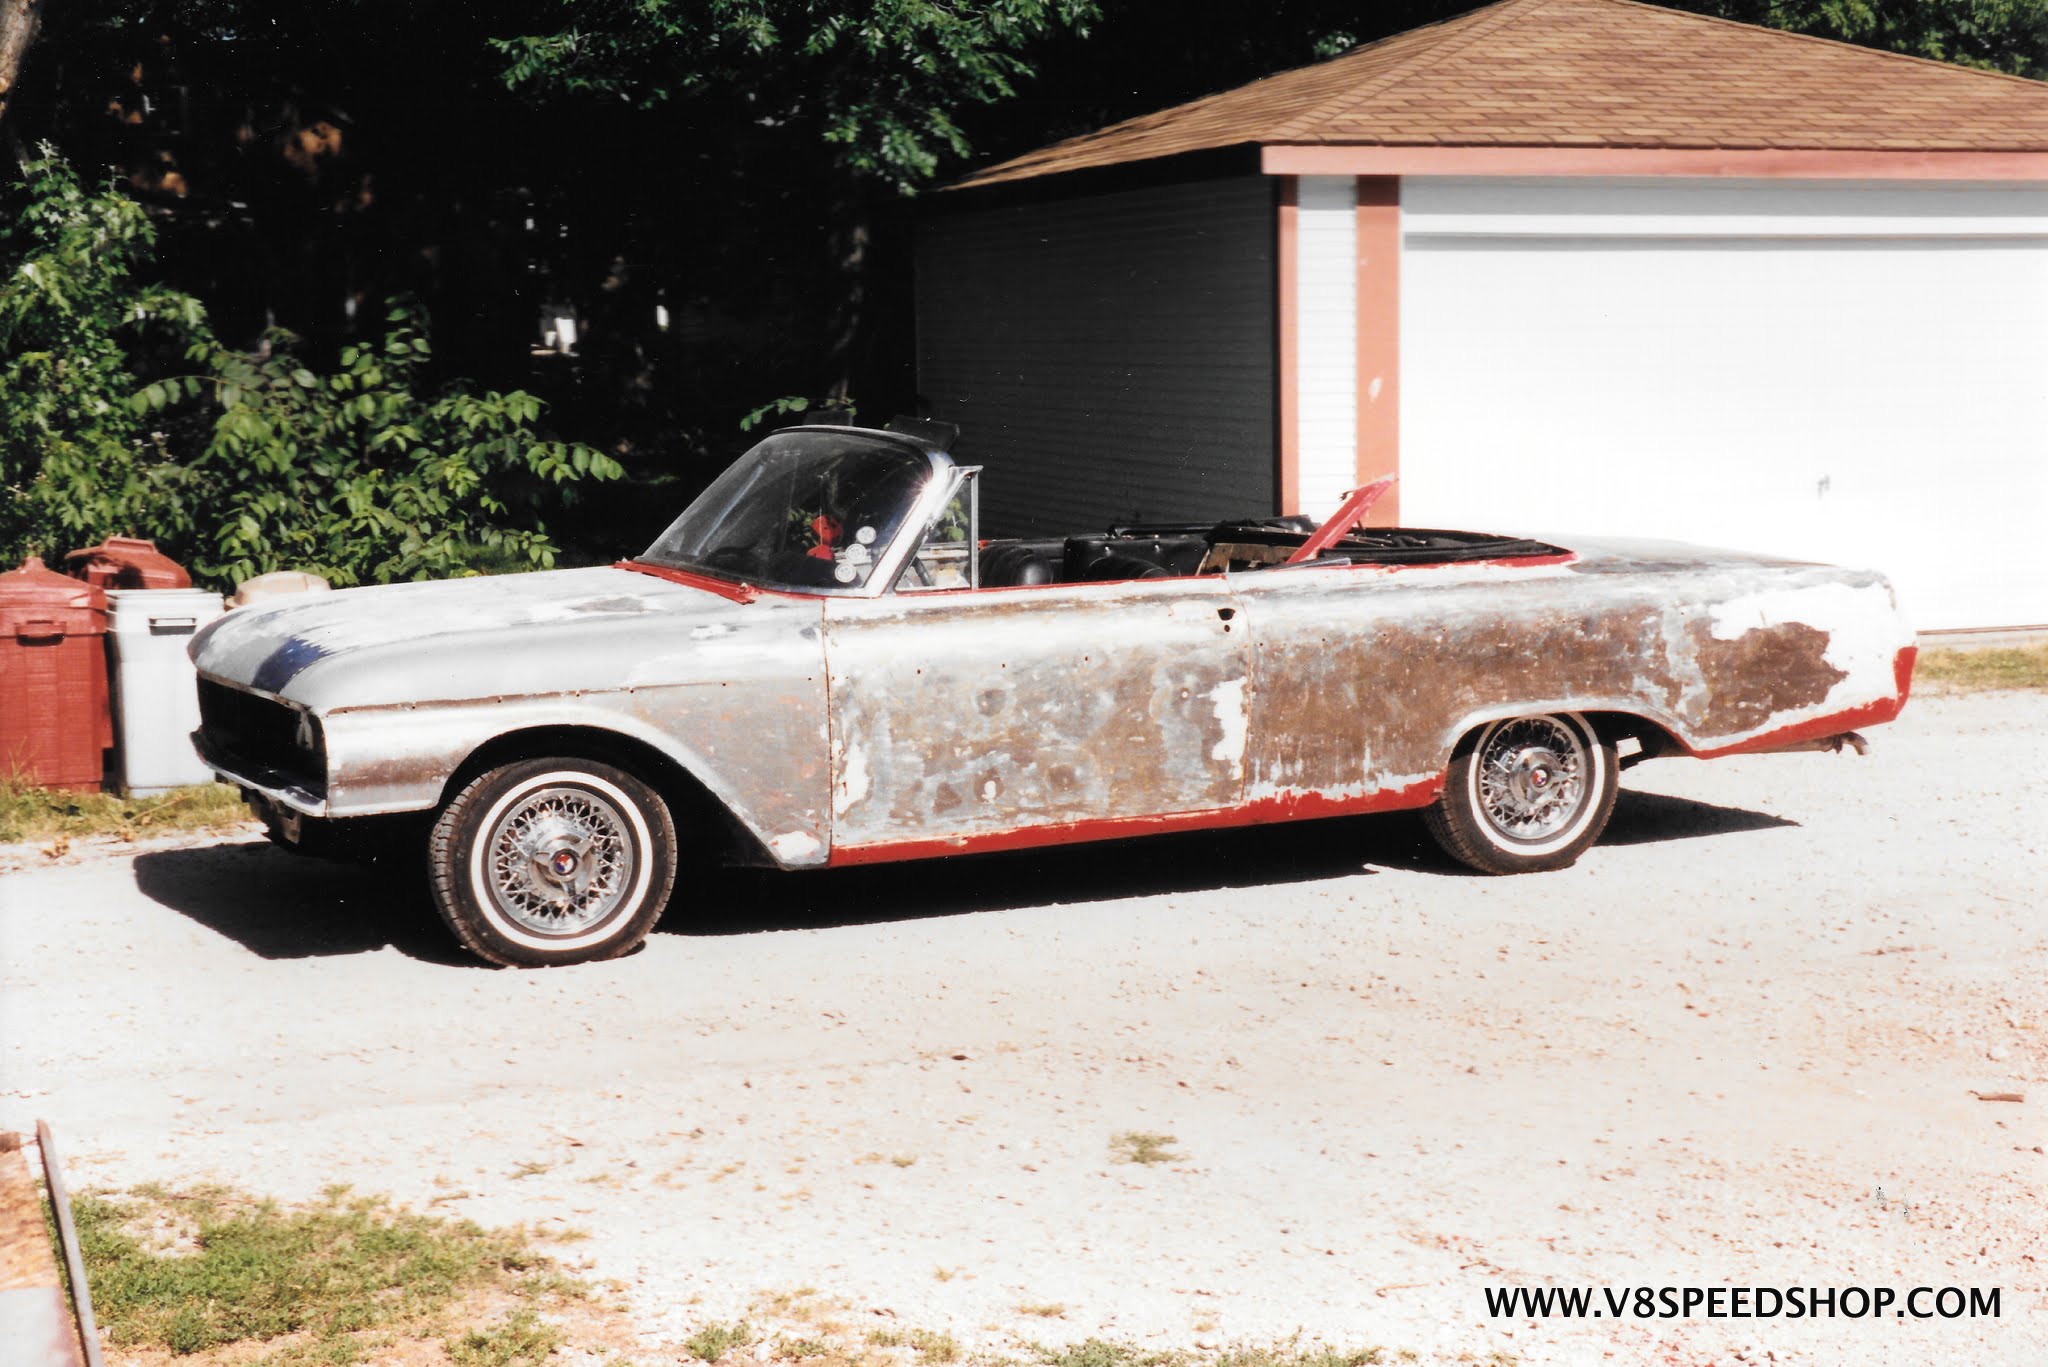 1962 Ford Galaxie 500 XL Convertible Paint Stripping